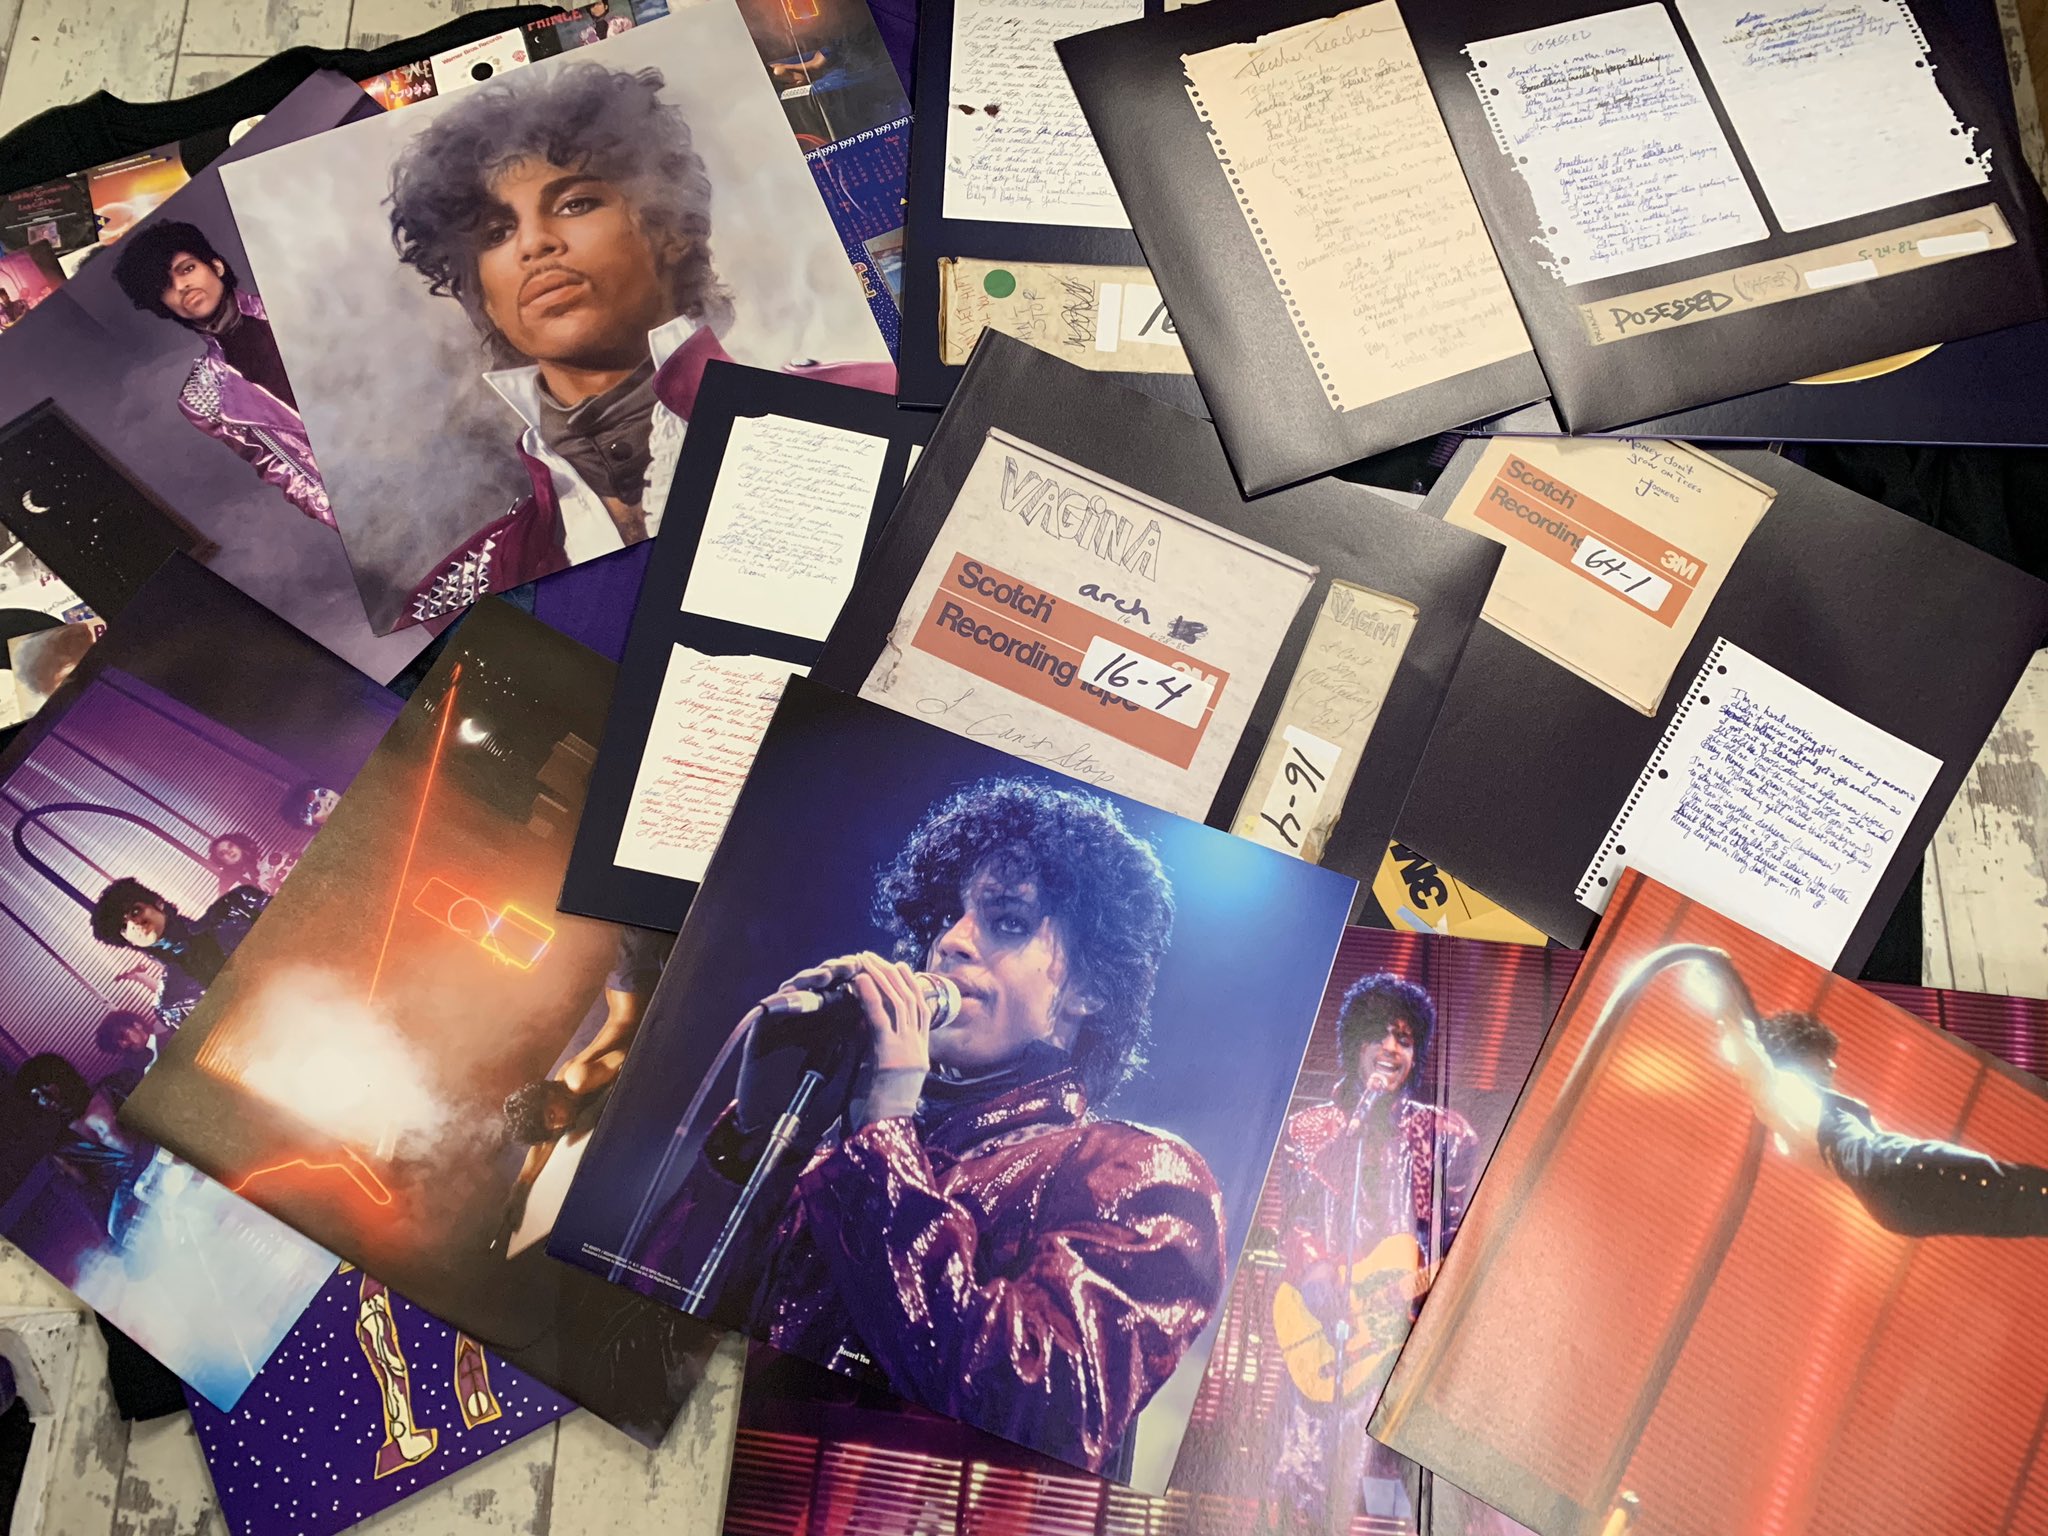 Prince 1999 Super Deluxe Box 5cd 1dvd Or 10lp 1dvd 11 29 19 Page 22 Steve Hoffman Music Forums